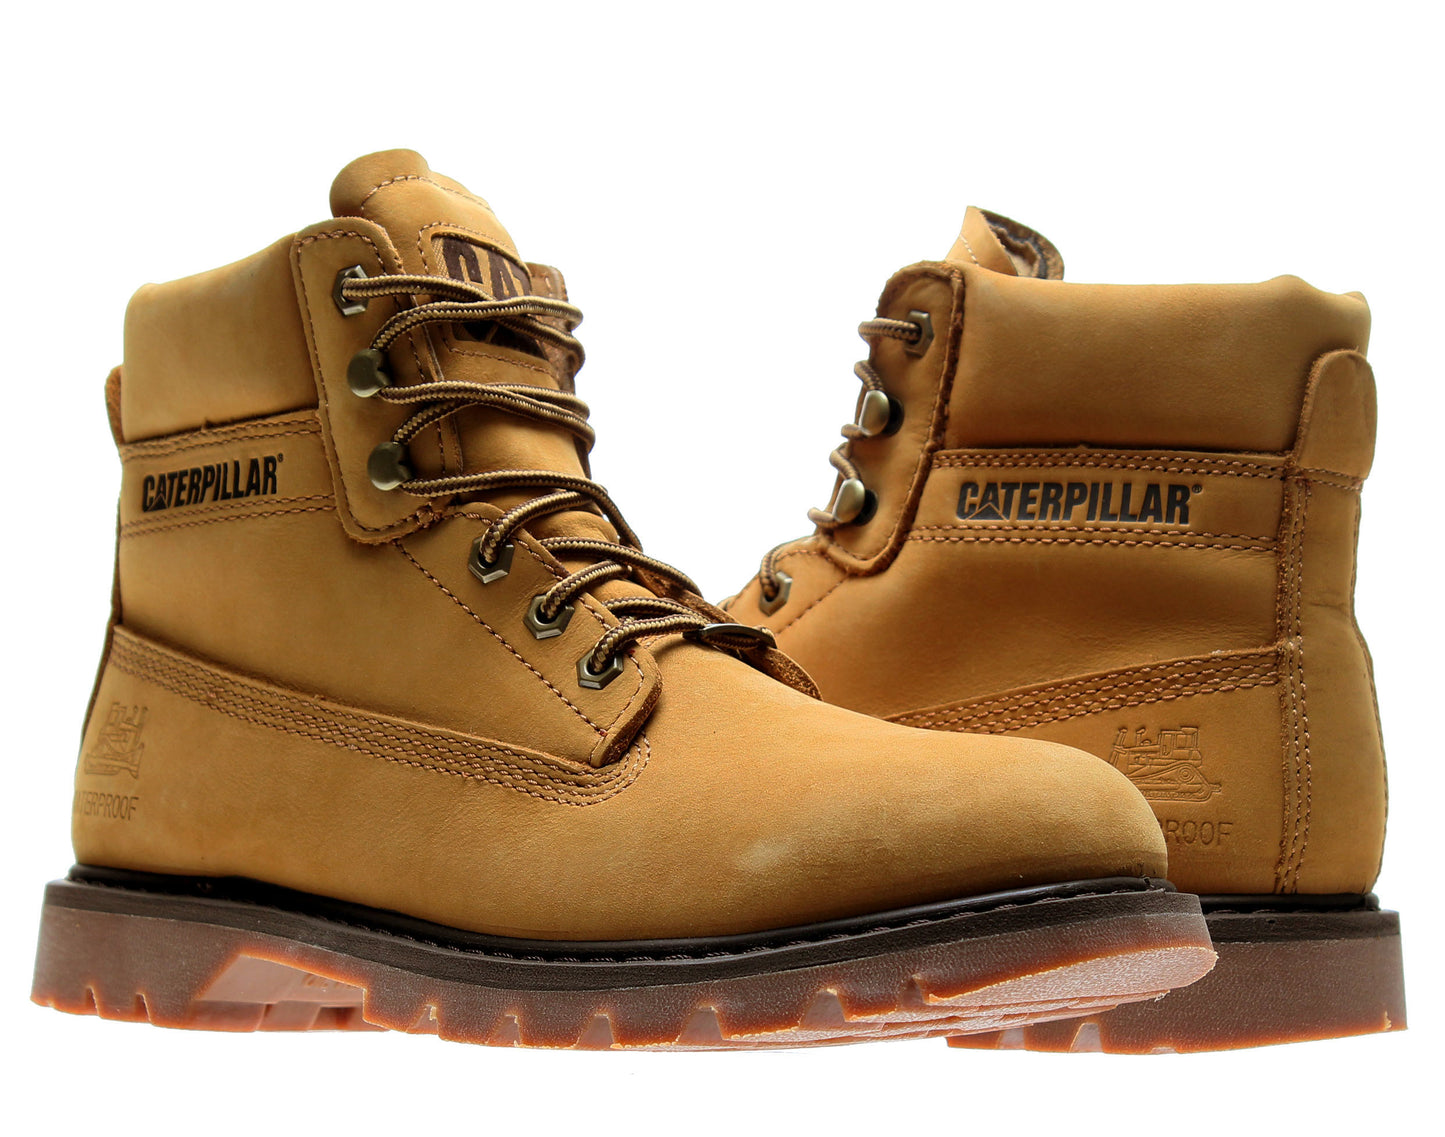 Caterpillar Watershed WP 6-Inch Soft Toe Men's Boots